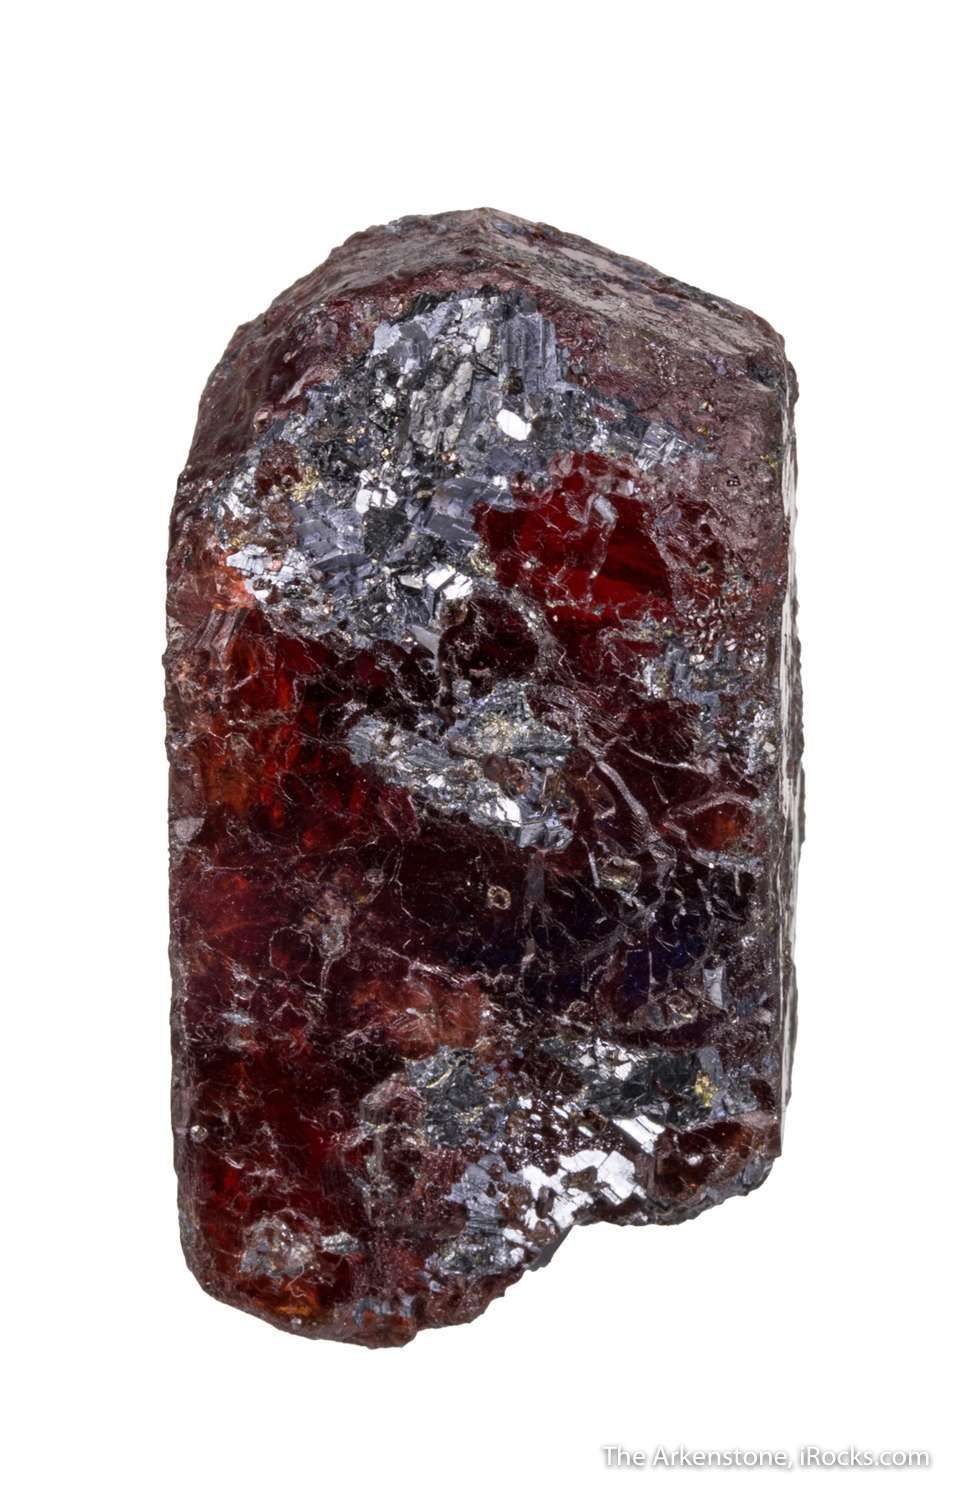 Aggregate of ferrorhodonite (red crystals) in galena